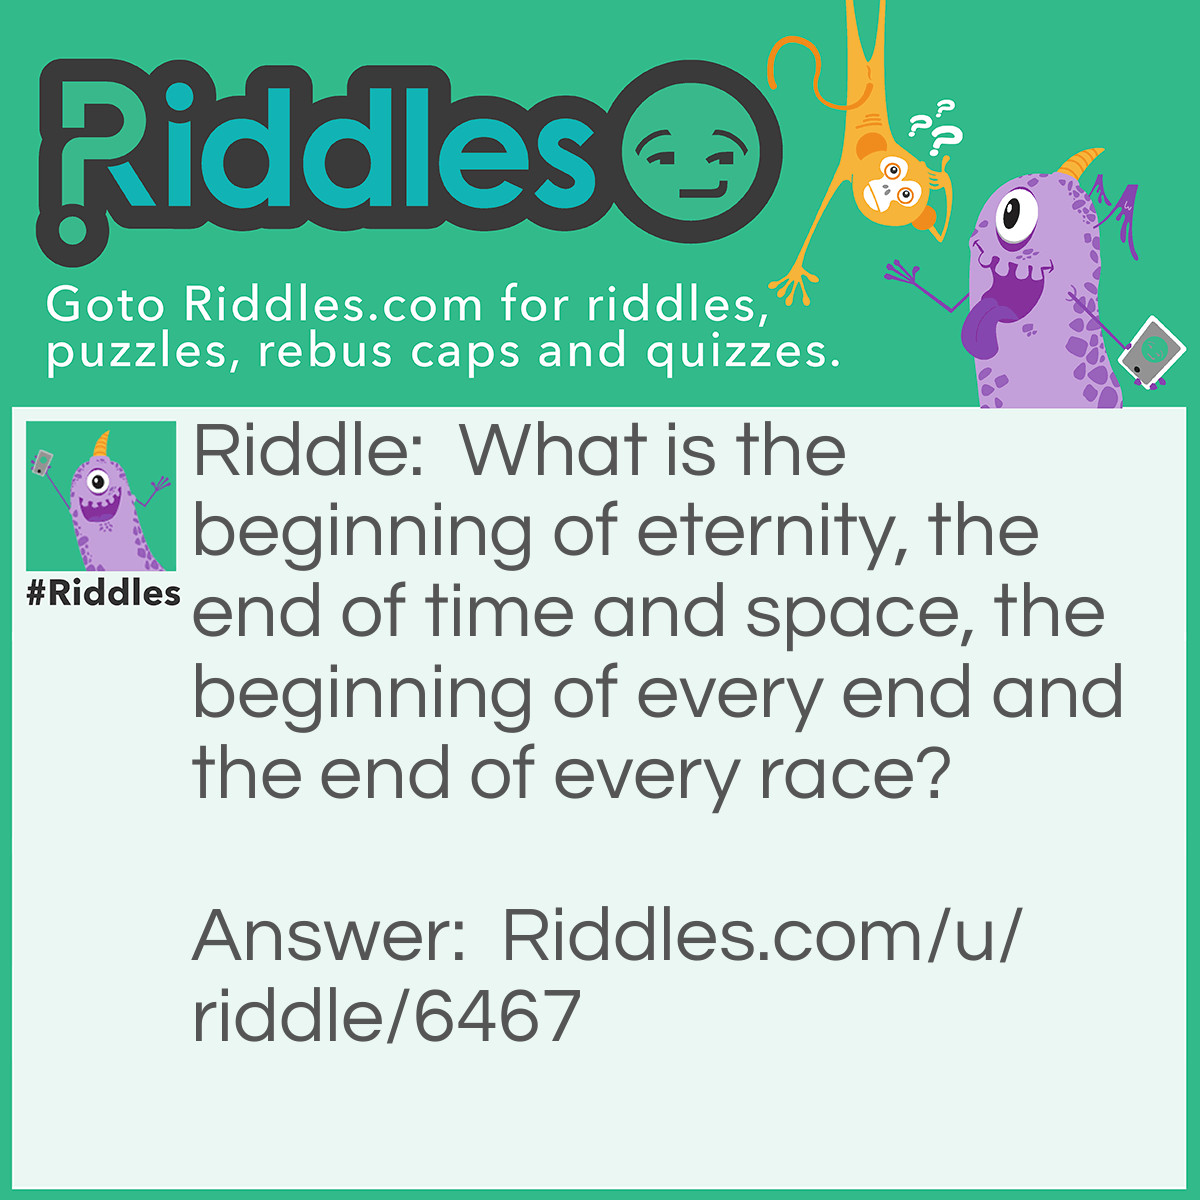 Riddle: What is the beginning of eternity, the end of time and space, the beginning of every end and the end of every race? Answer: The letter E.